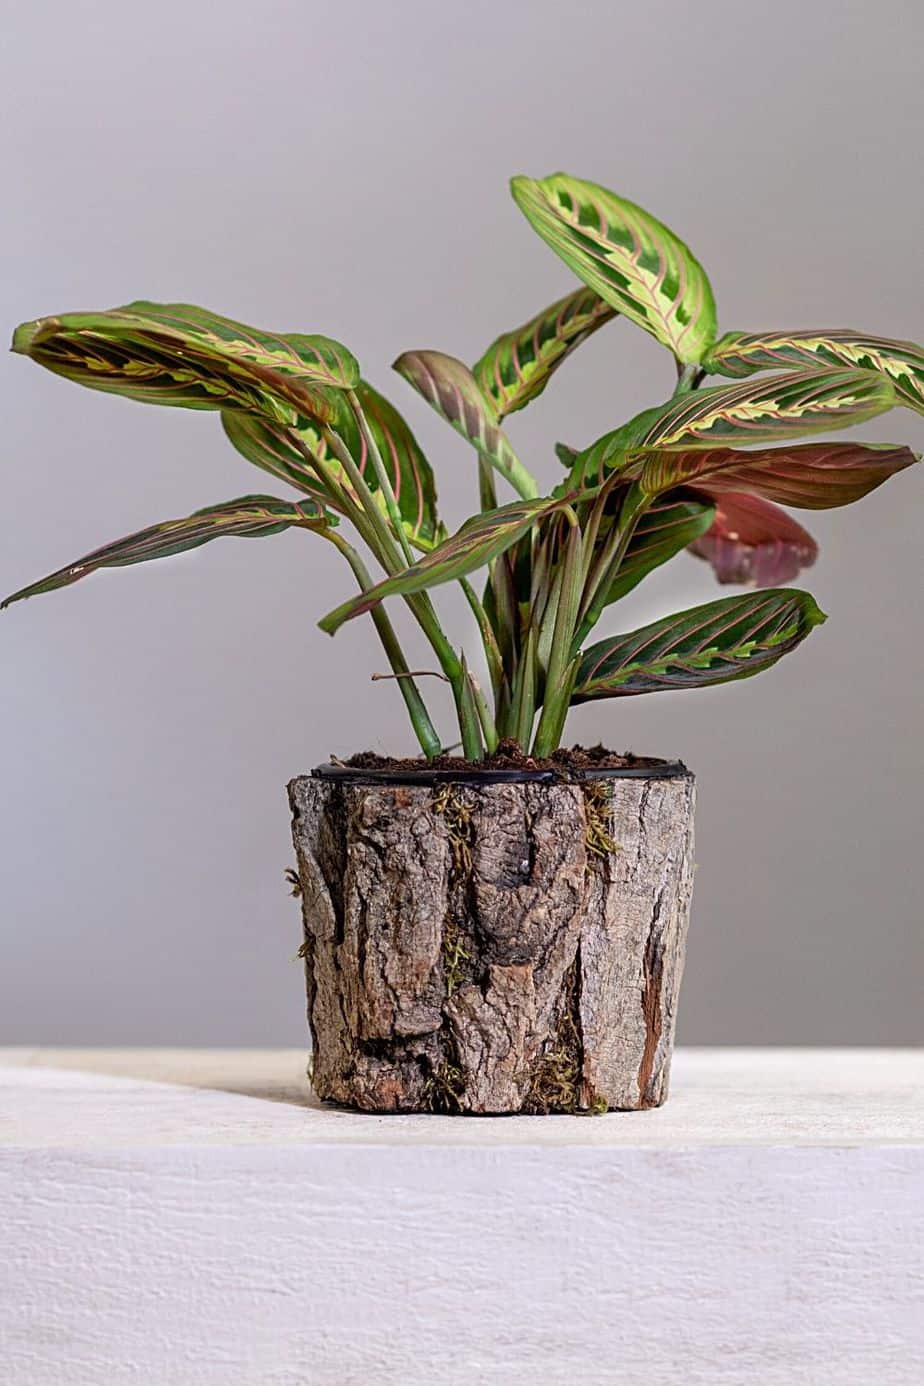 Known for its flat leaves during the play and curled leaves at night, Prayer Plant is another beautiful plant you can place by your northwest-facing window